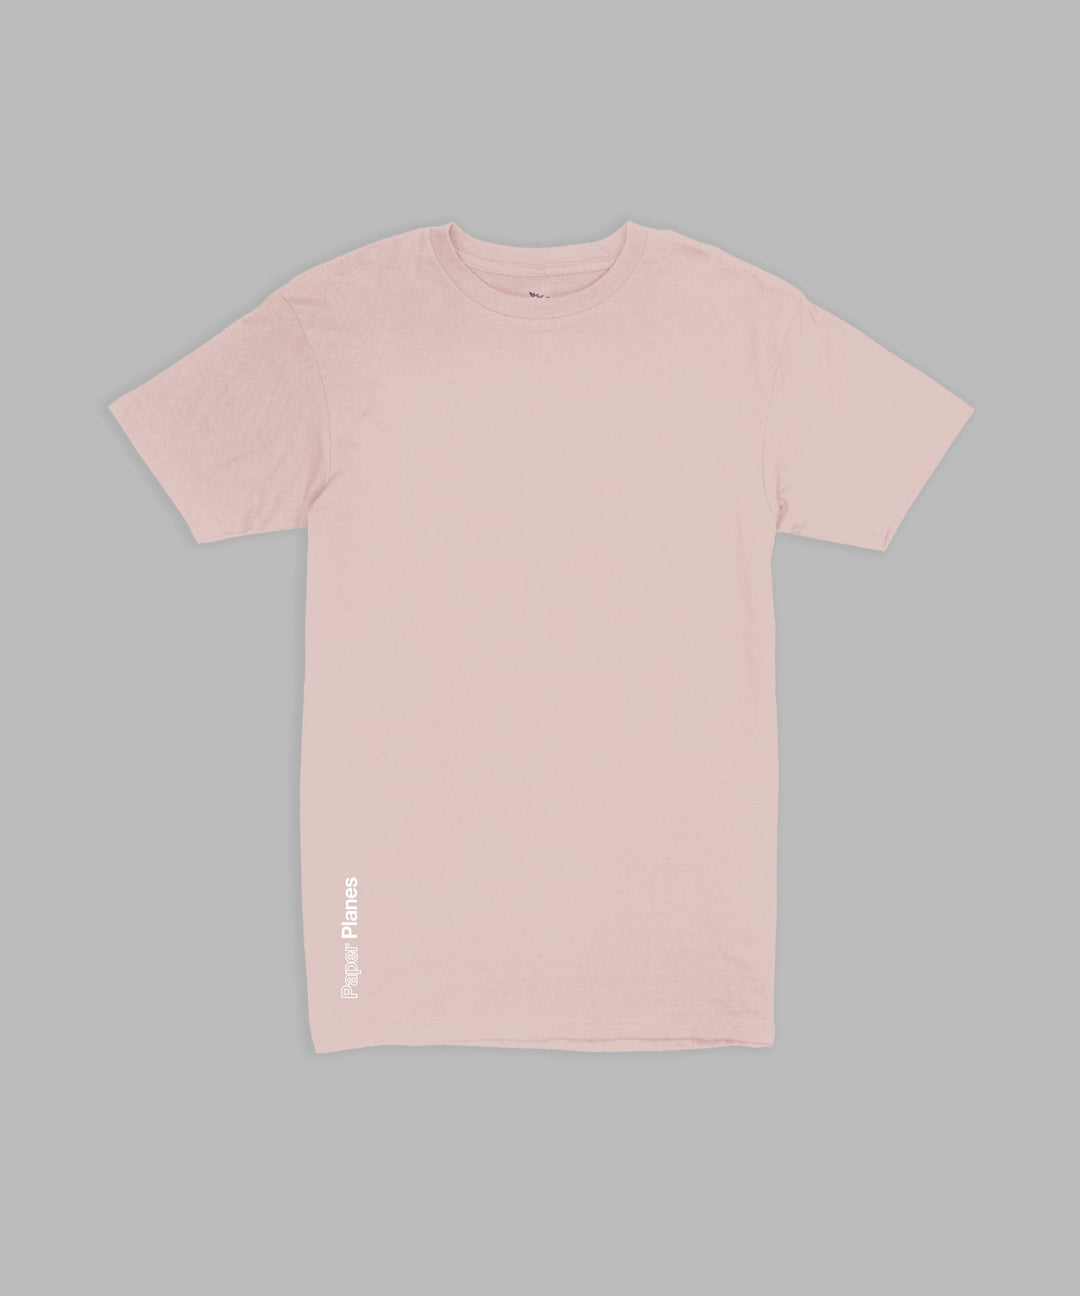 Roc Nation Paper Planes WINDOW SEAT TEE Washed Pink